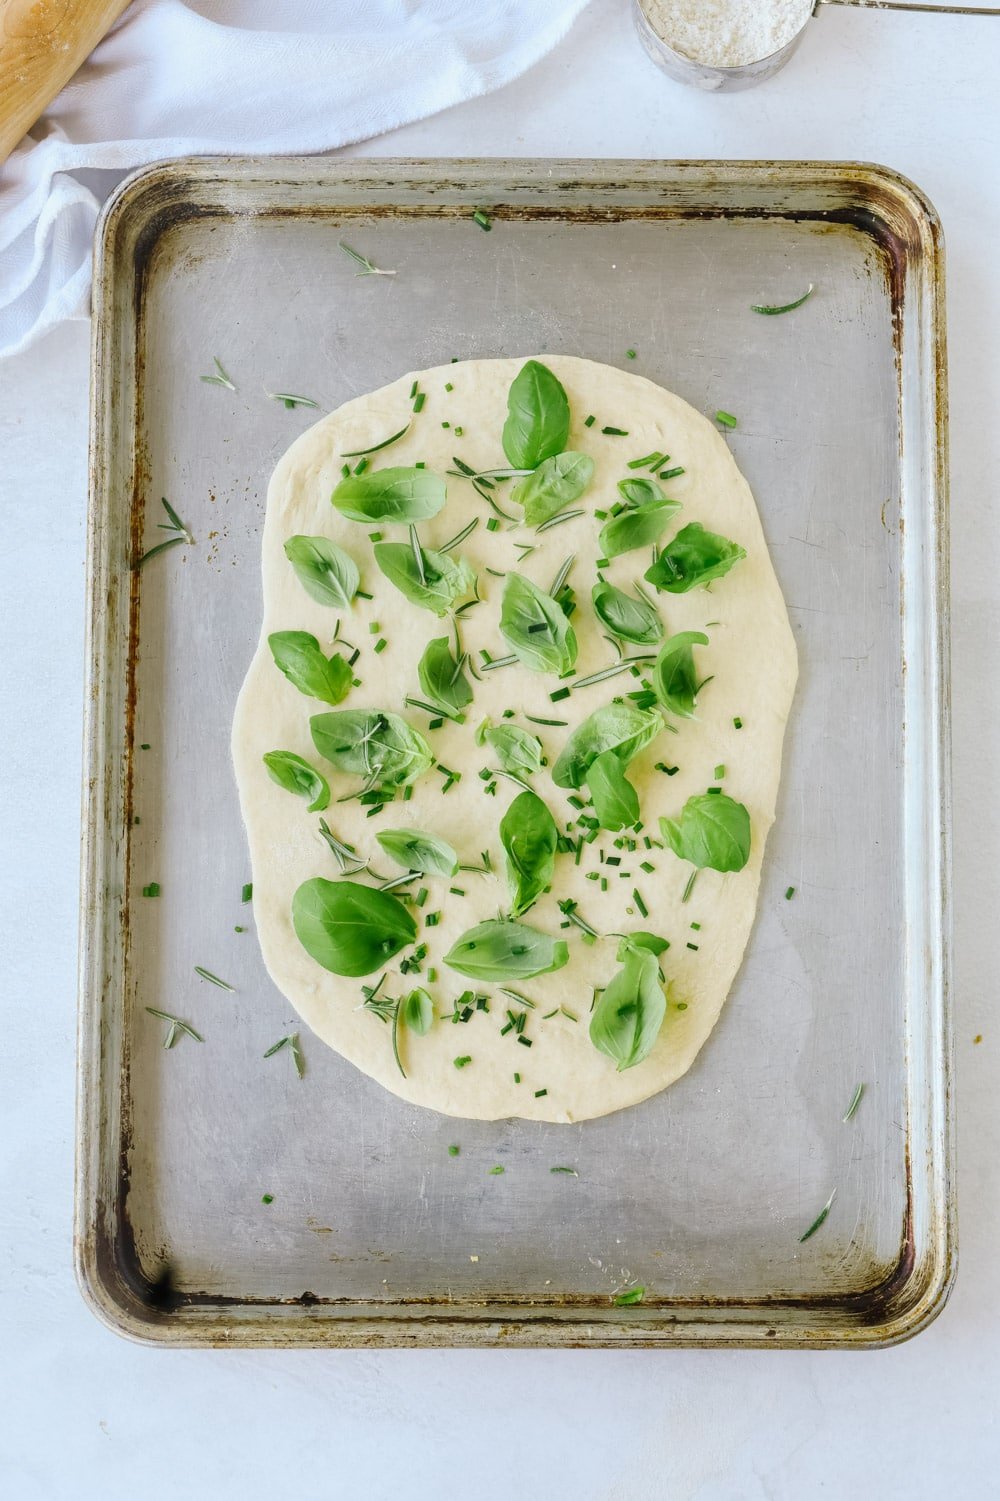 flatbread dough with herbs on it.